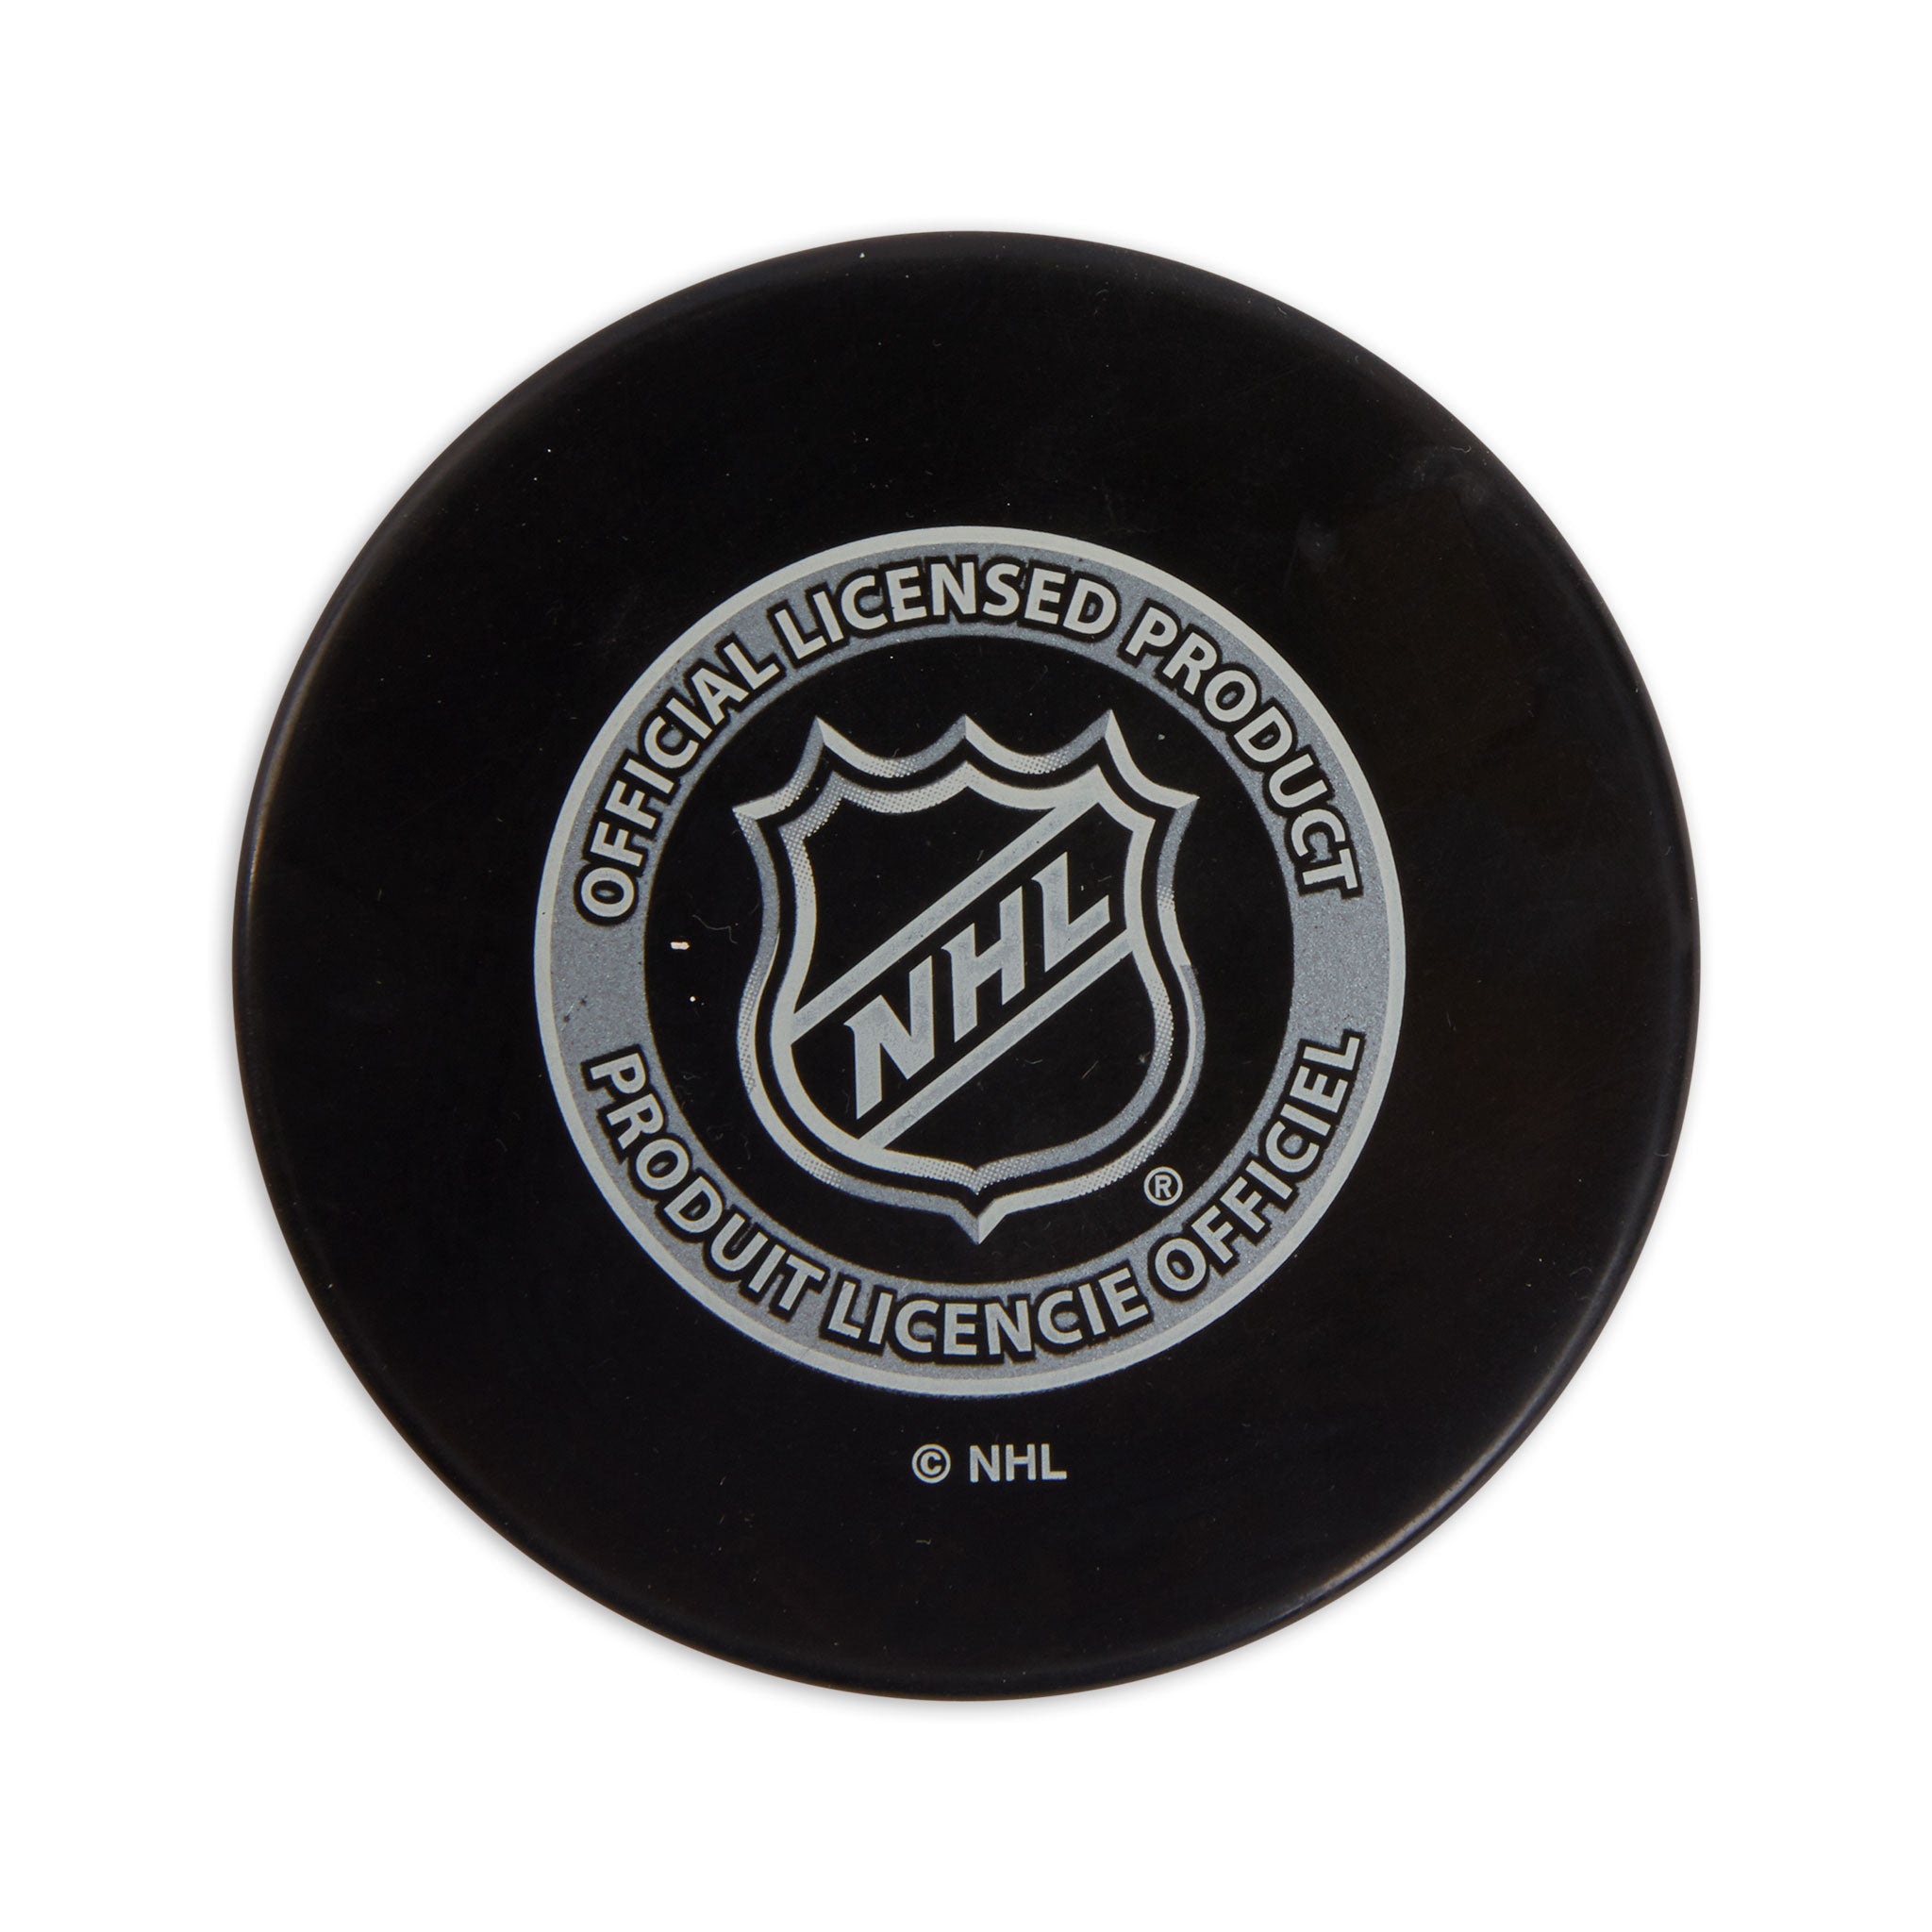 Vegas Golden Knights merchandise top-selling for all US NHL teams, Golden  Knights/NHL